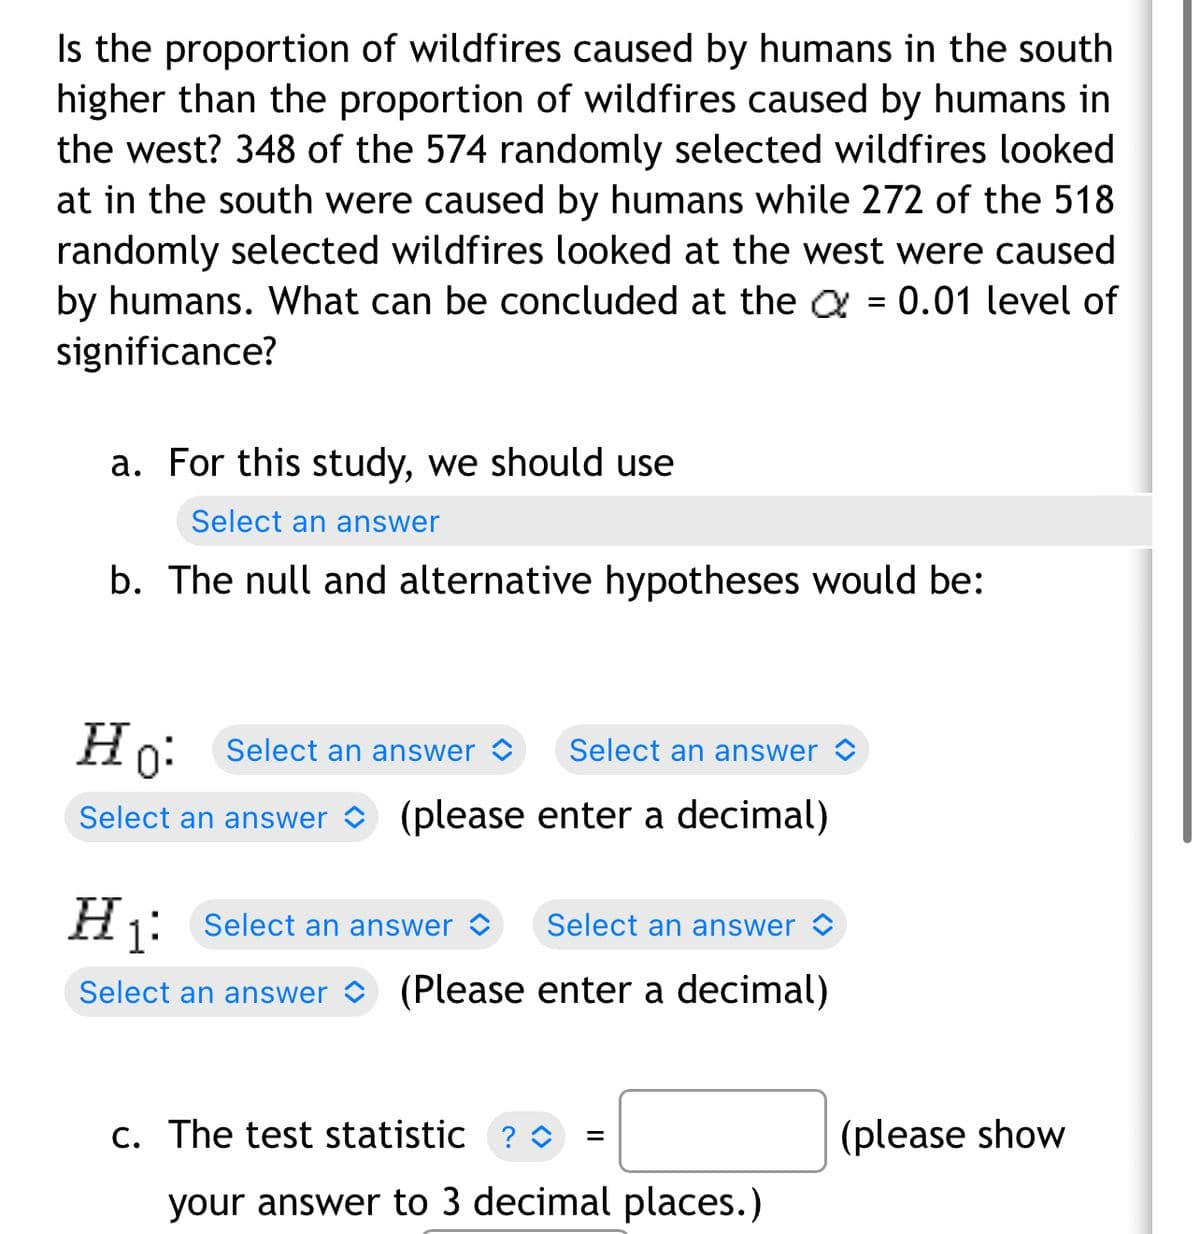 Is the proportion of wildfires caused by humans in the south
higher than the proportion of wildfires caused by humans in
the west? 348 of the 574 randomly selected wildfires looked
at in the south were caused by humans while 272 of the 518
randomly selected wildfires looked at the west were caused
by humans. What can be concluded at the = 0.01 level of
significance?
a. For this study, we should use
Select an answer
b. The null and alternative hypotheses would be:
Ho:
Select an answer
Select an answer
Select an answer (please enter a decimal)
H₁: Select an answer
Select an answer
Select an answer (Please enter a decimal)
=
c. The test statistic ? ◊
your answer to 3 decimal places.)
(please show